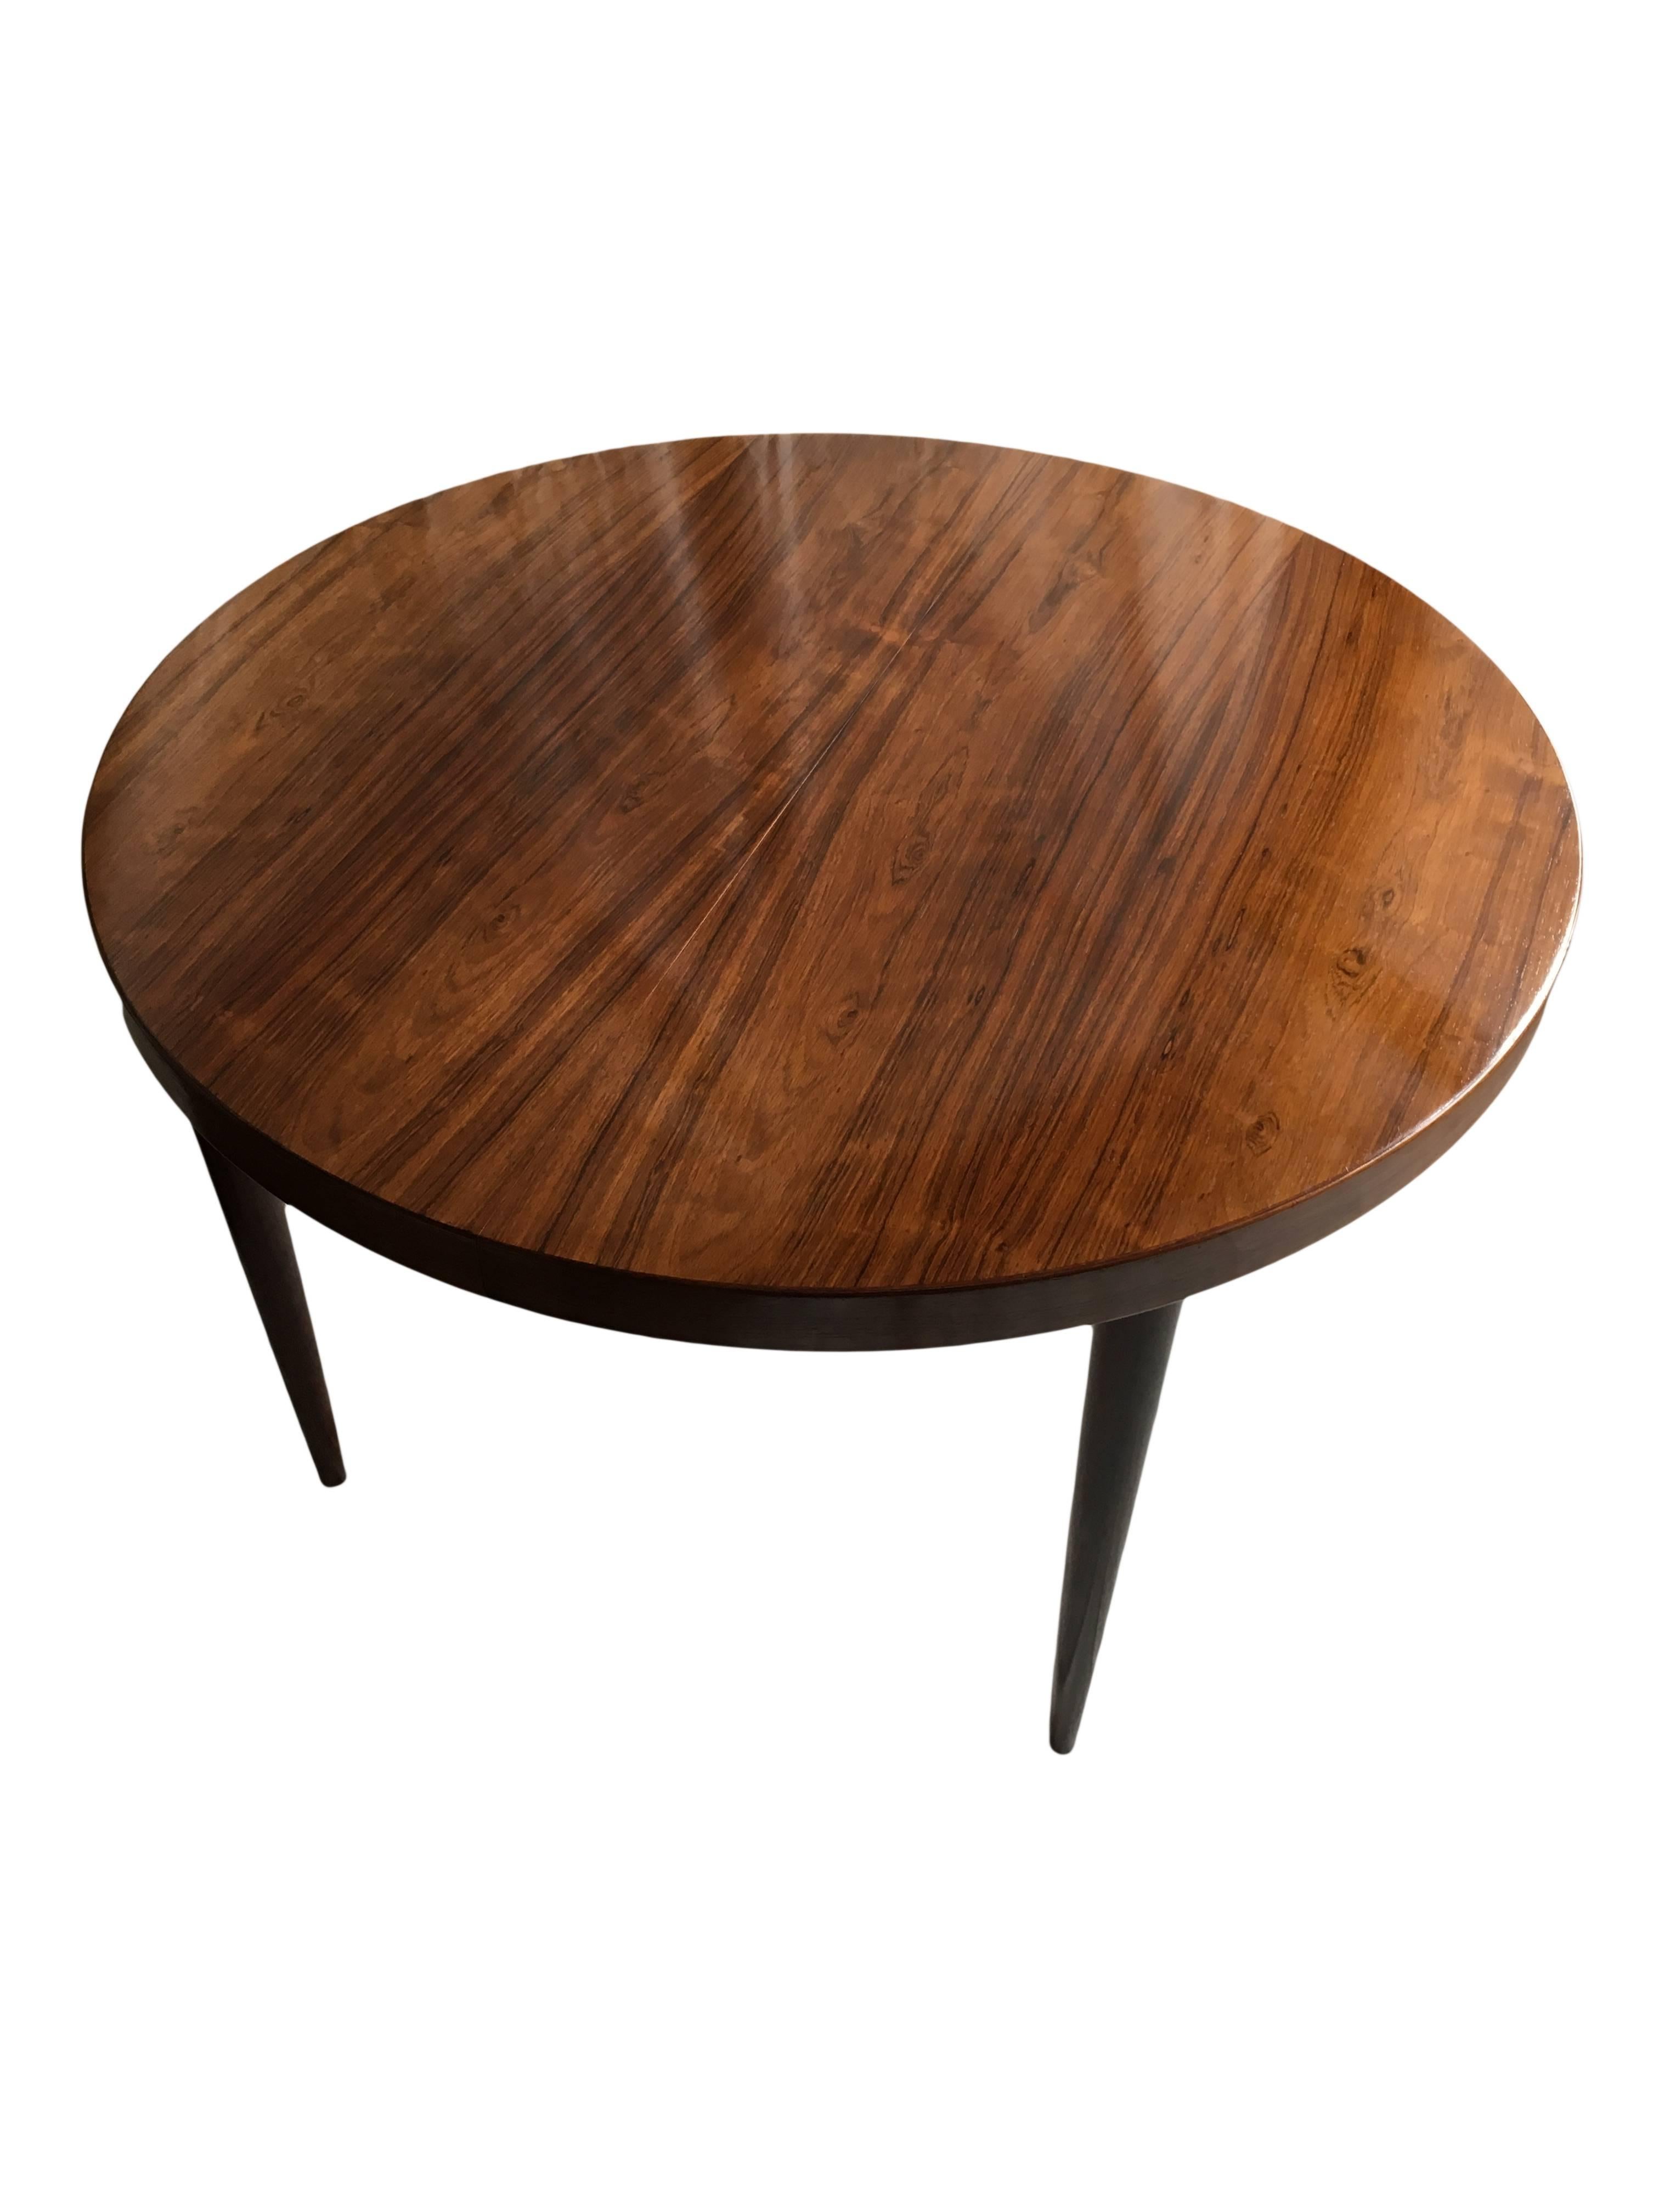 The classic Kai Kristiansen designed circular dining table. Ultra modernist in design. Extending with one drop-in leaf of 55cm. Danish production circa 1960. Lovely grain figuring and coloring.
Superb condition with refinished surface. We also have